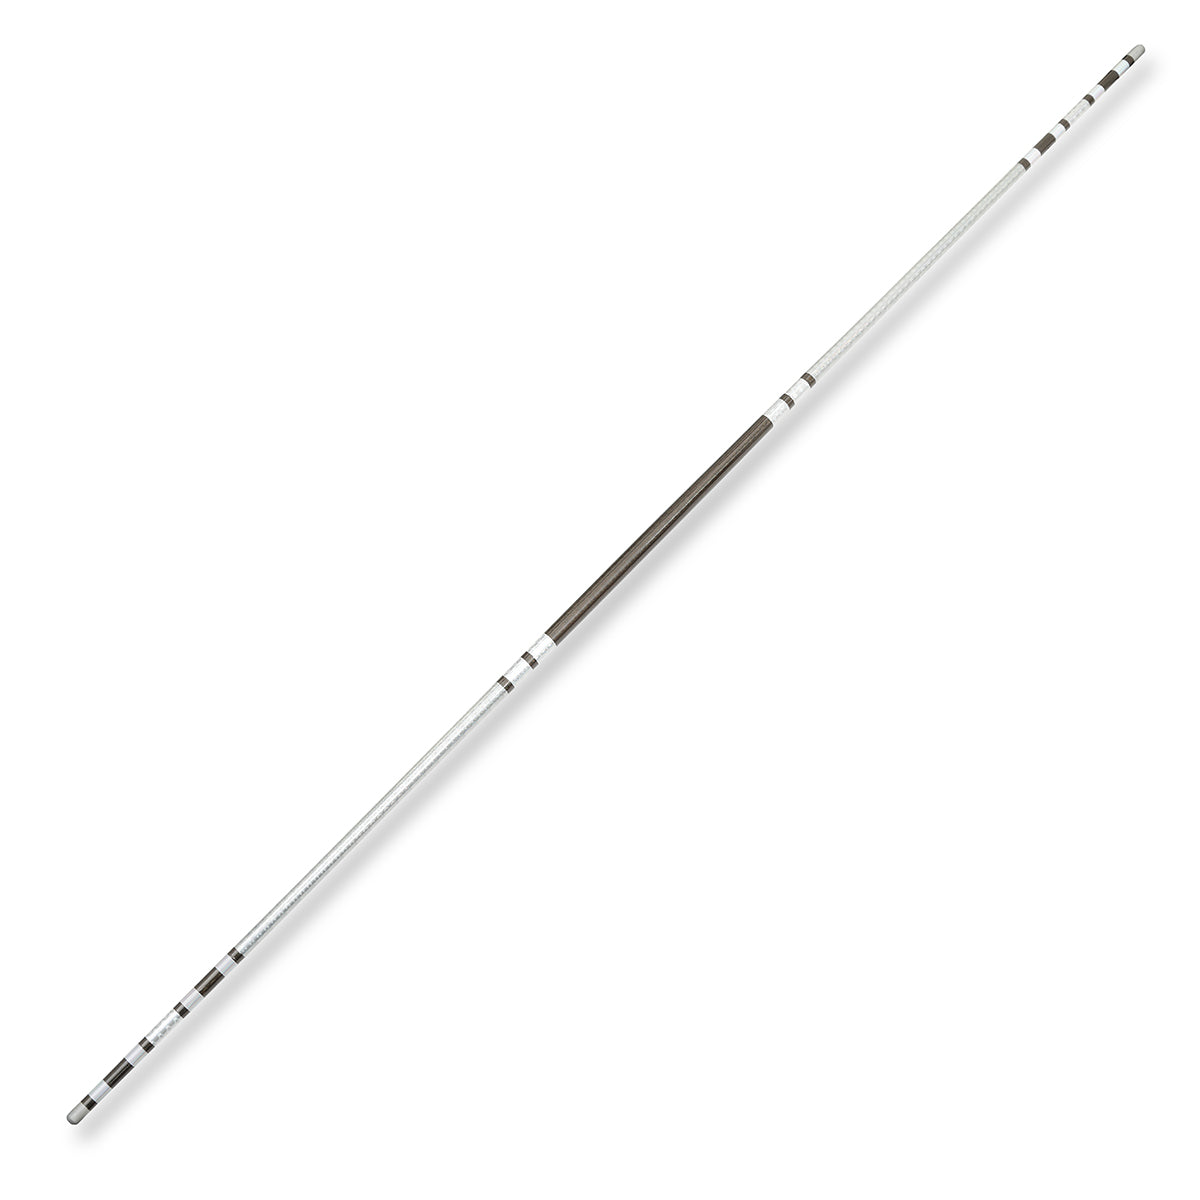 Chrome Competition Silver/Black Ultra Light Bo Staff - 72 Inches